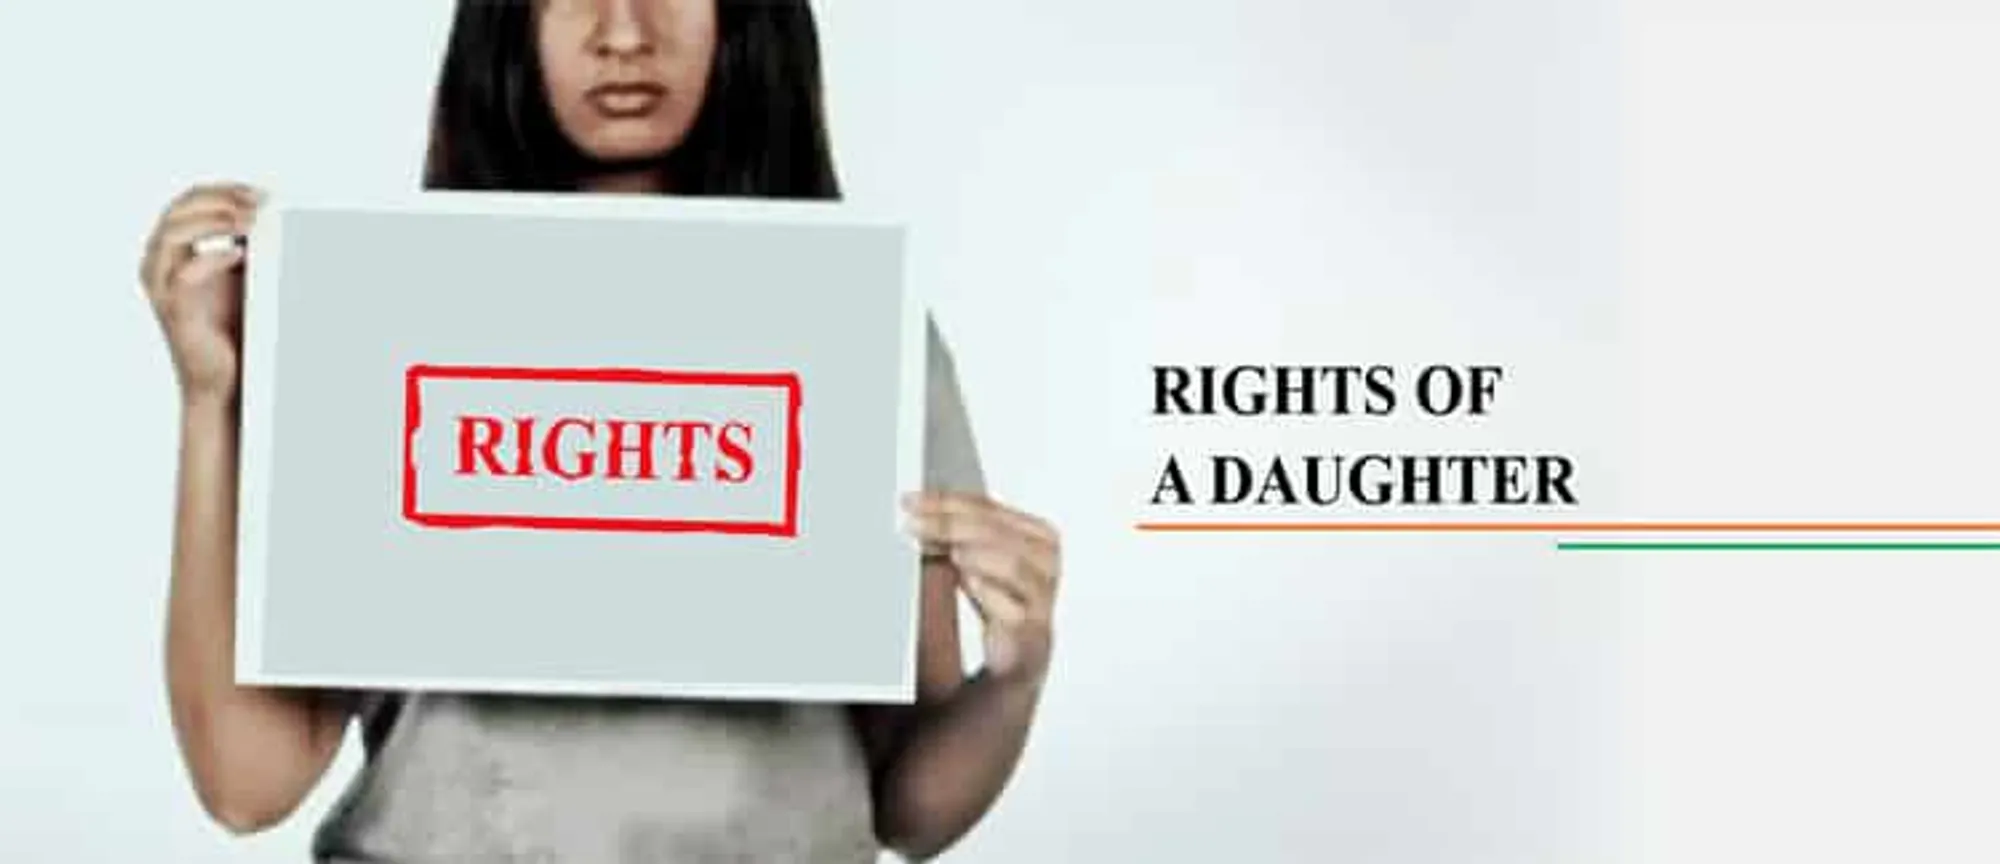 RIGHTS OF A DAUGHTER IN INDIA